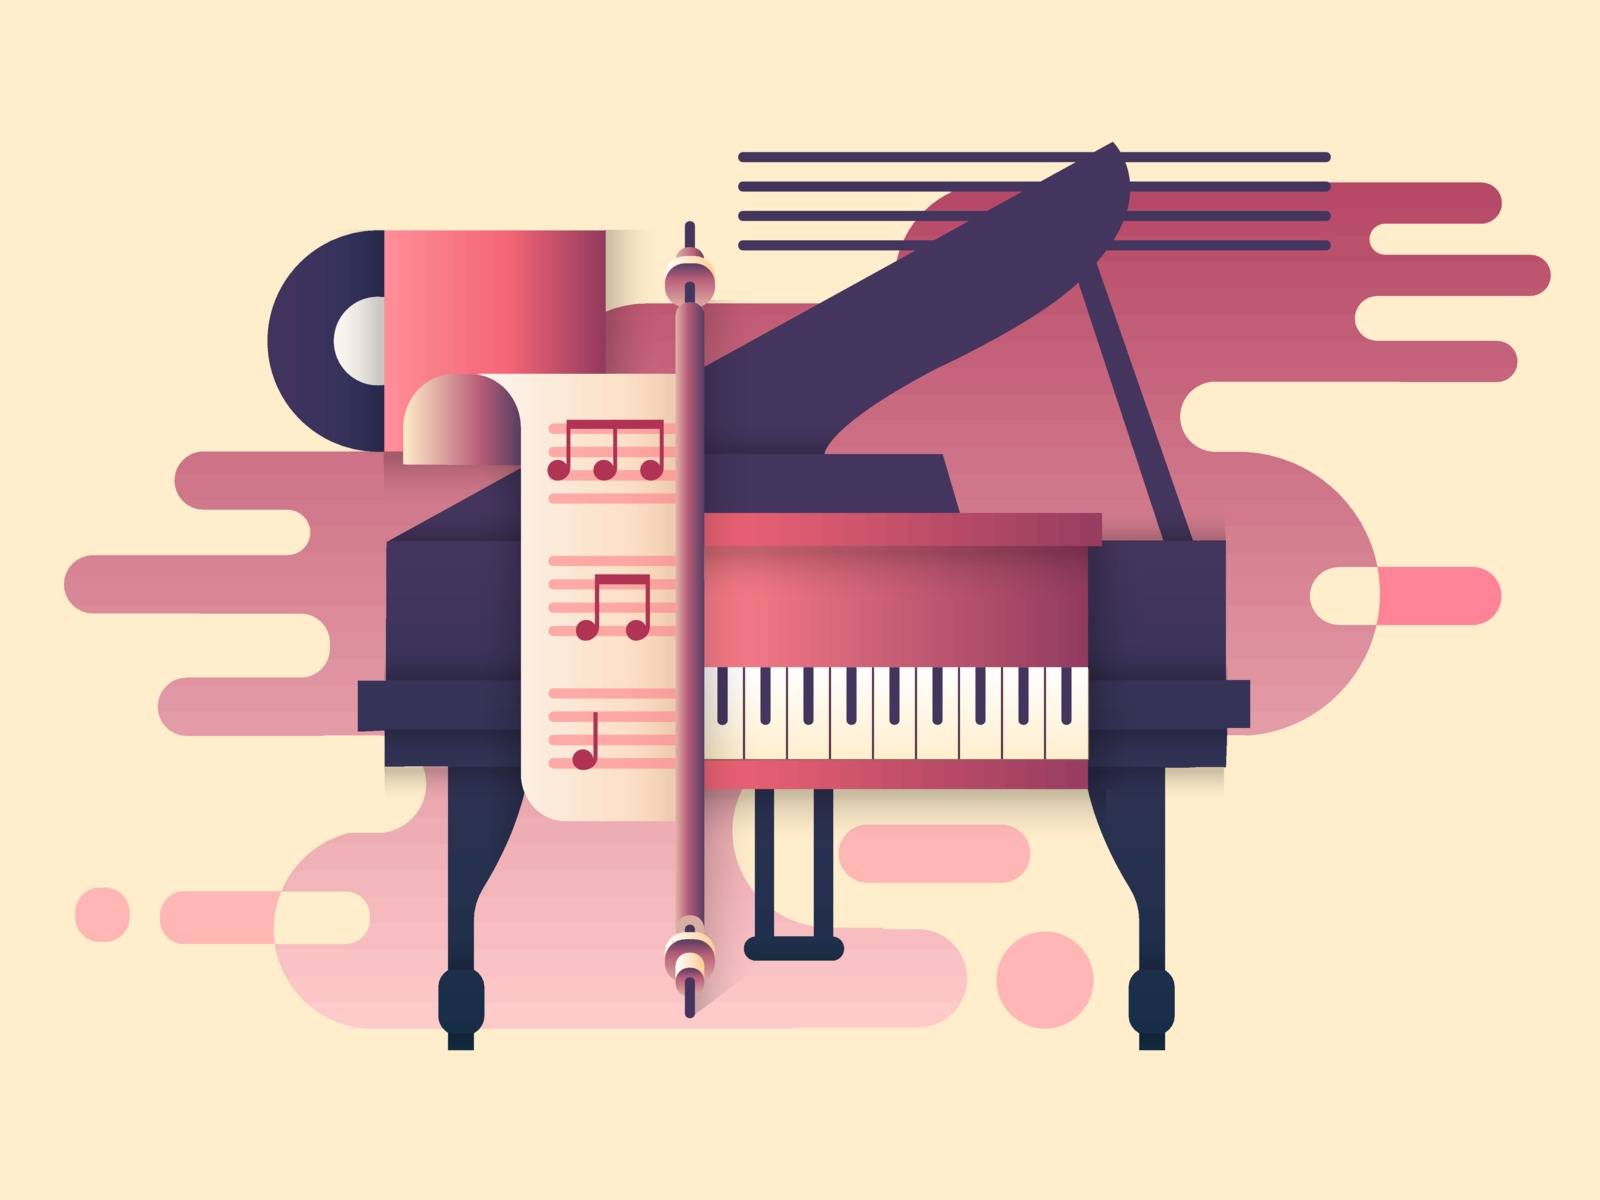 Piano design flat. Music instrument, play keyboard, classic concert, classical sound melody, vector illustration